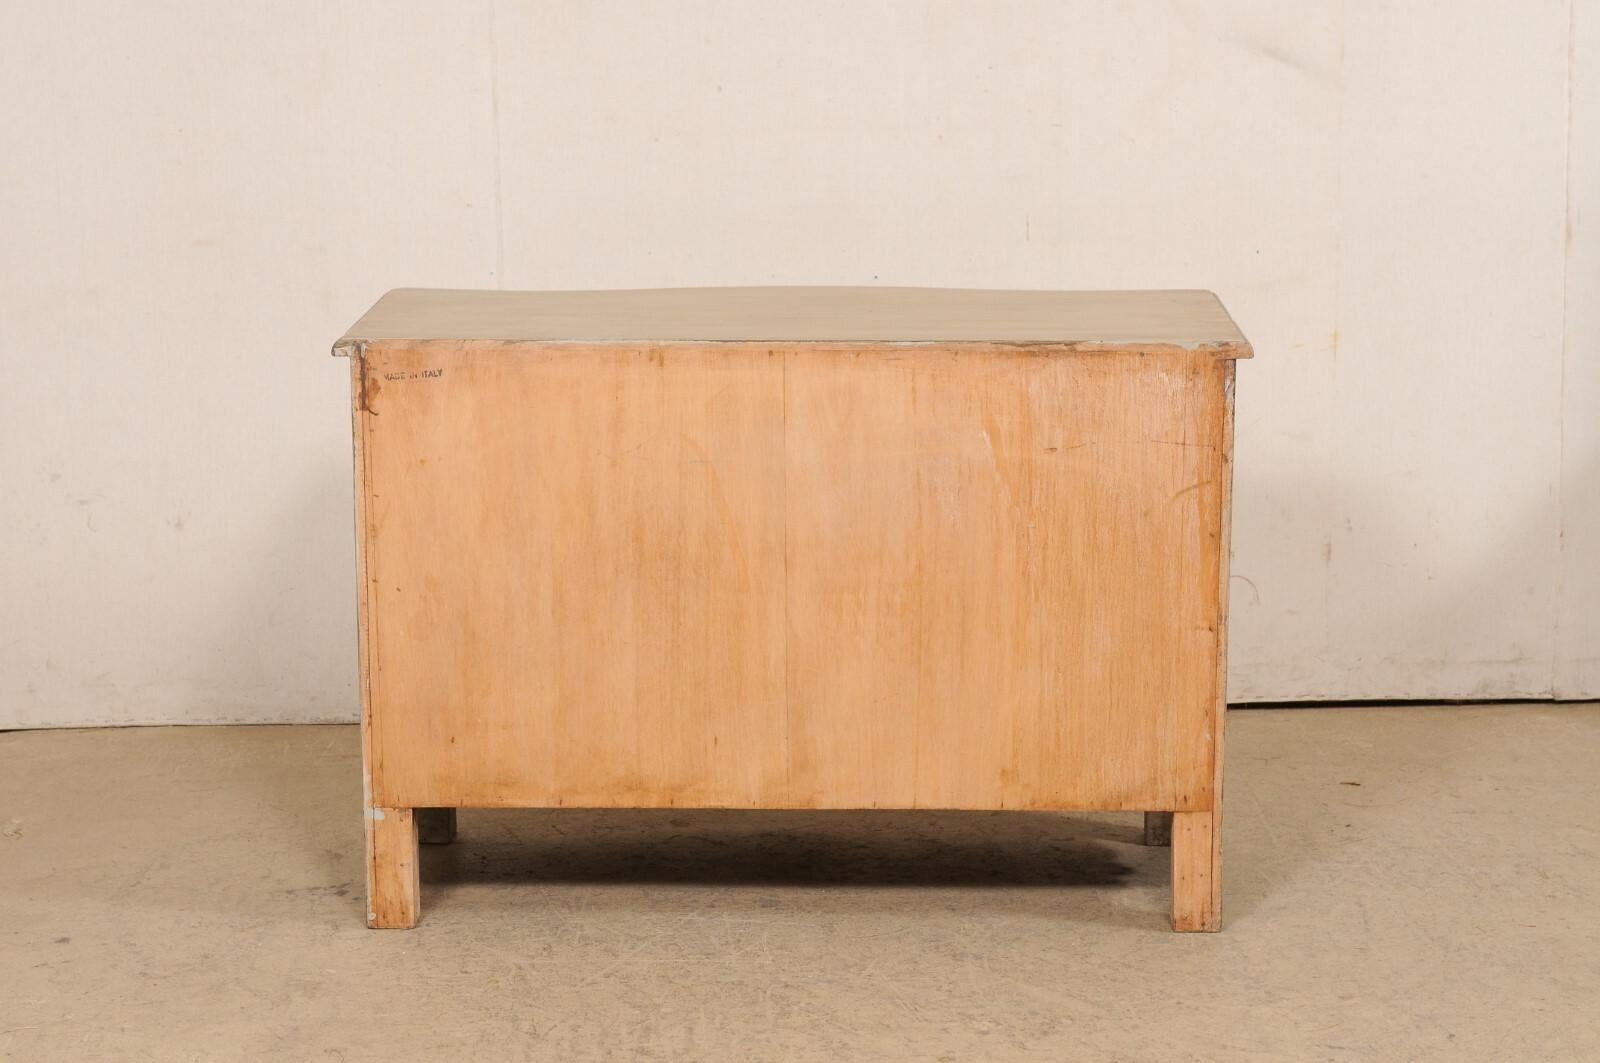 Italian Serpentine Three-Drawer Wooden Chest w/Scalloped Skirt, Mid 20th C. For Sale 7